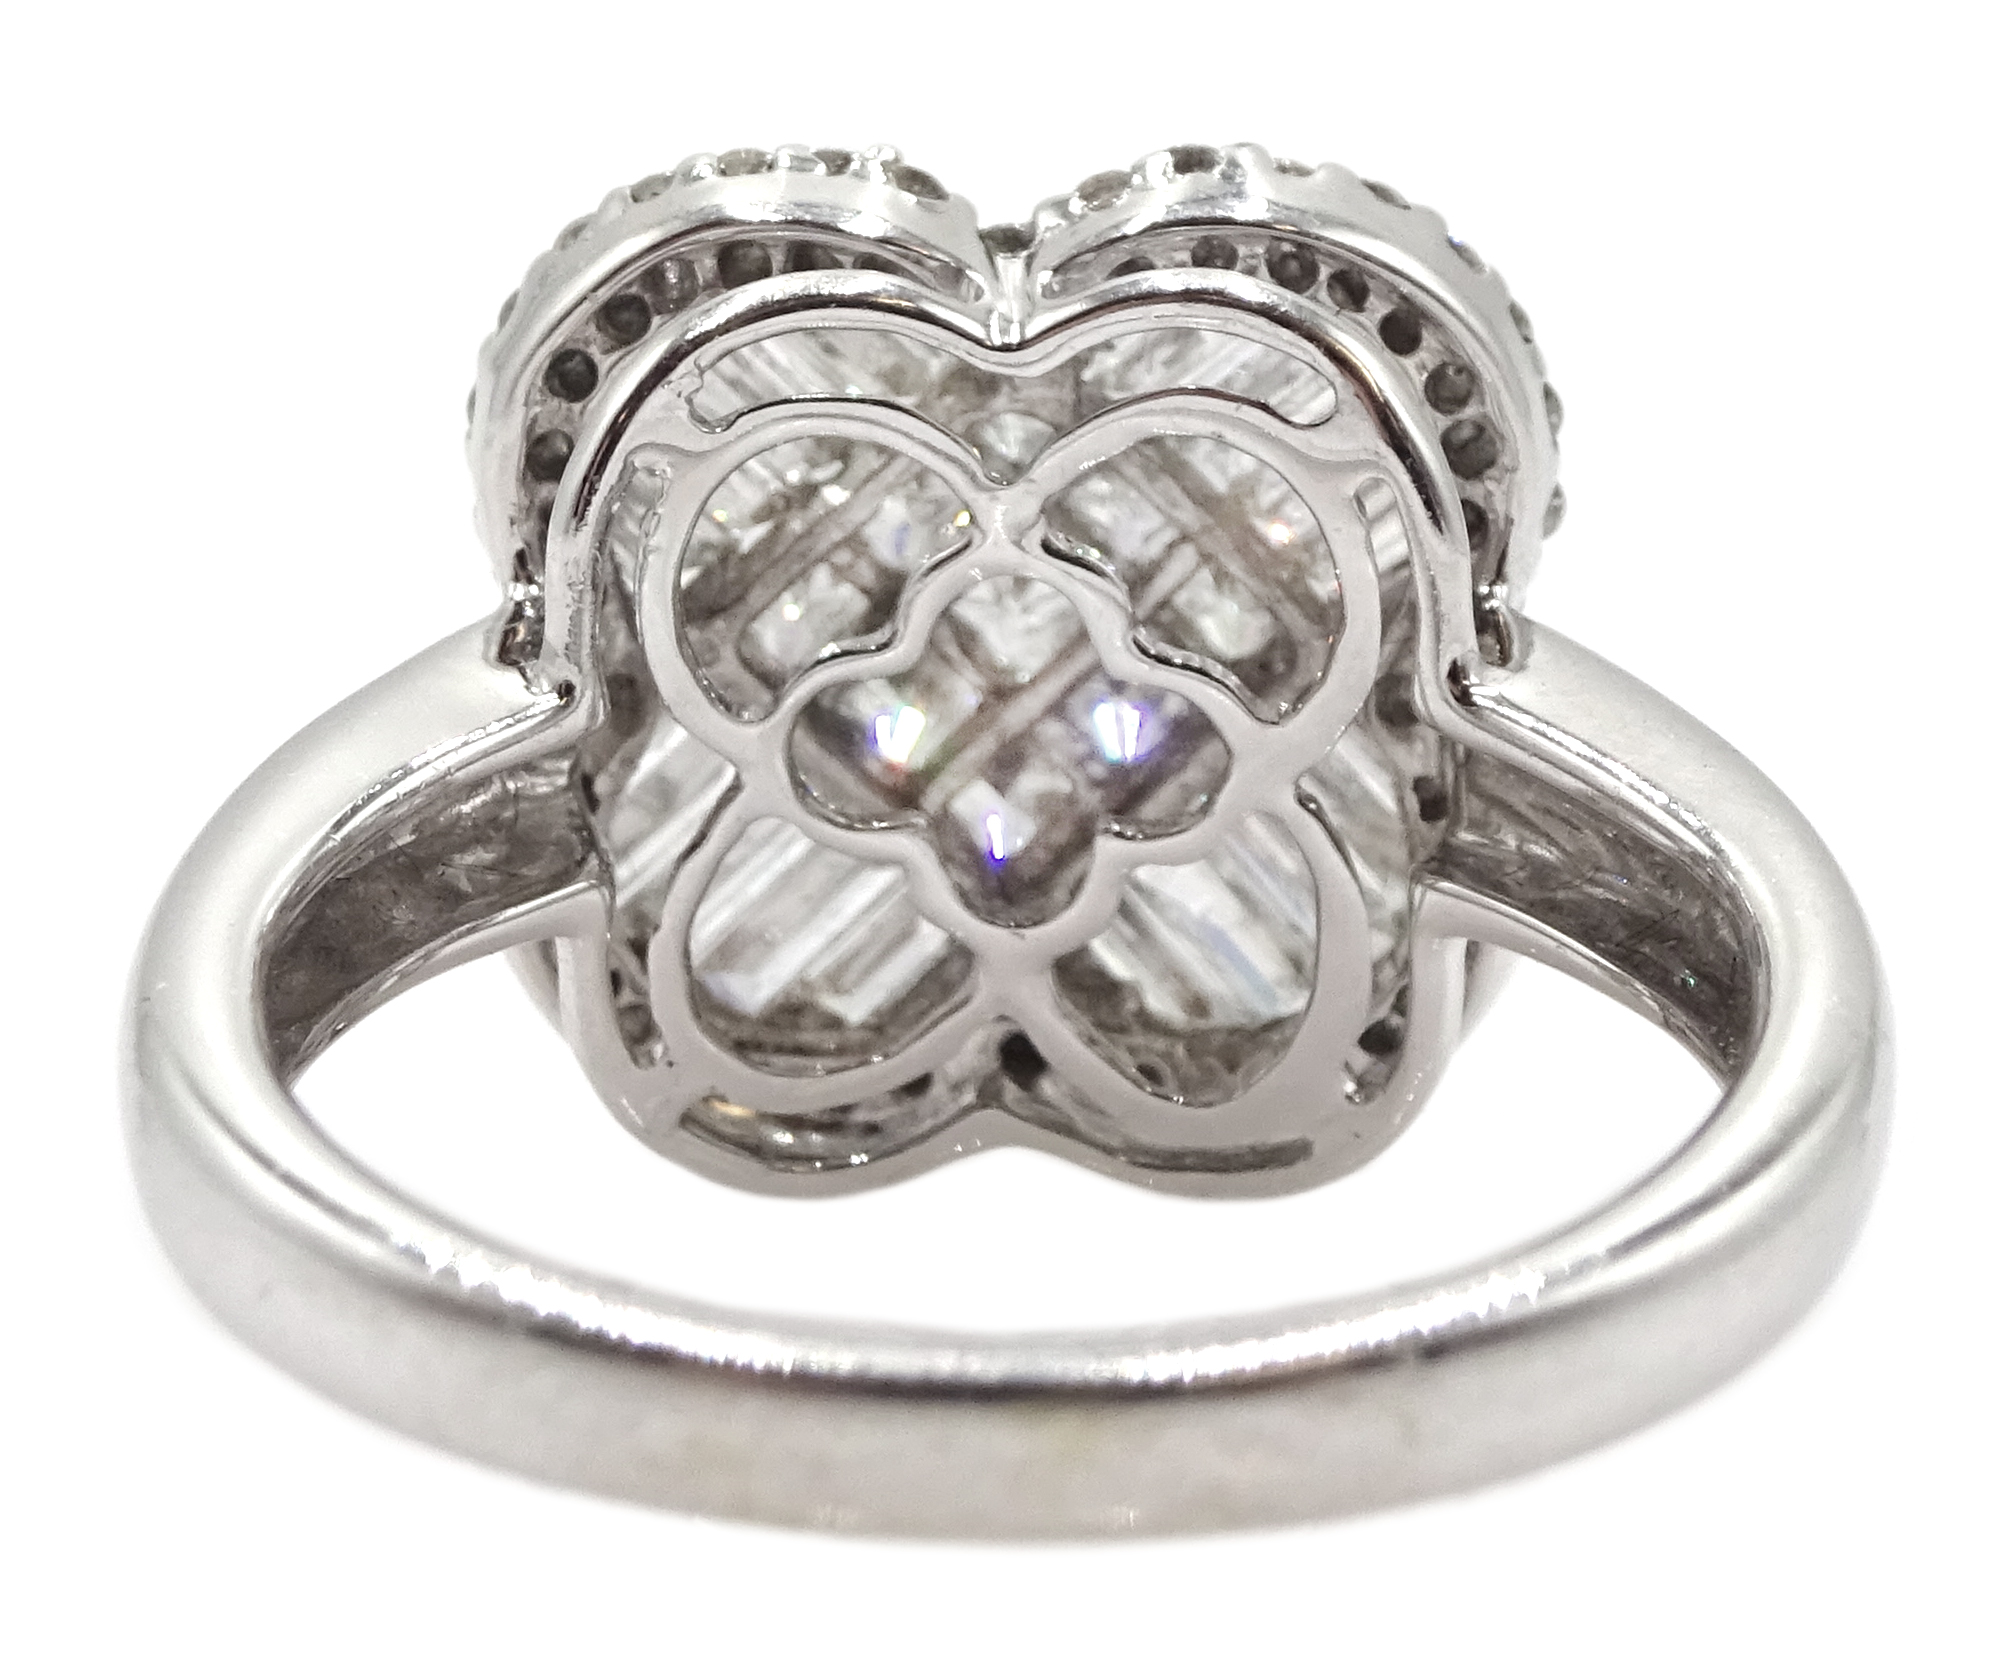 18ct white gold and diamond cluster ring - Image 6 of 6